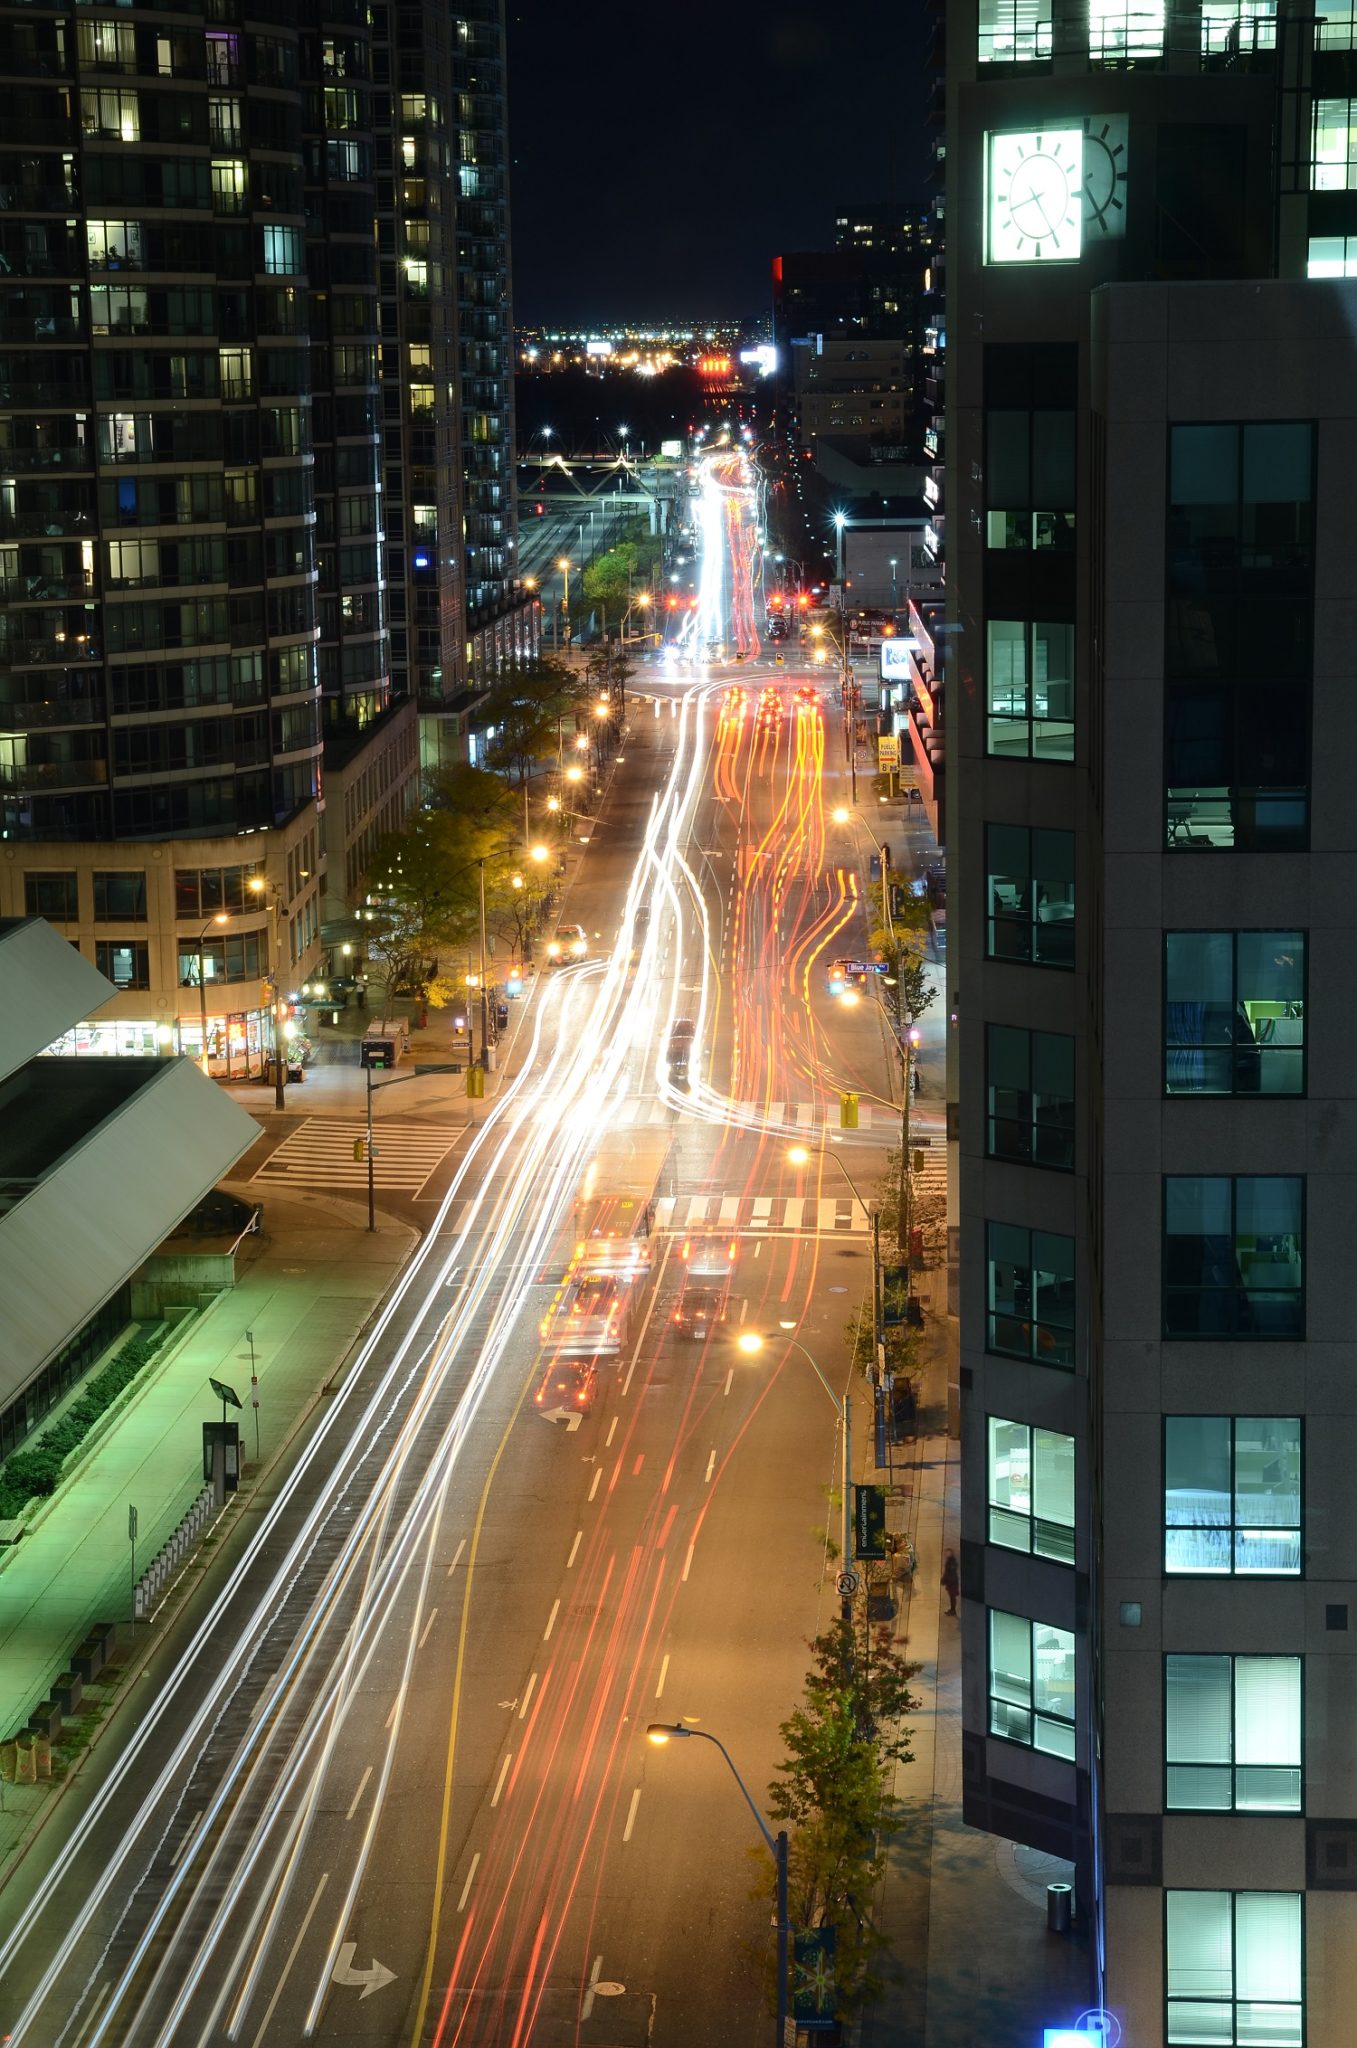 Photo Credit: Adnan Ali Muhammed. Shows the beauty of Toronto's Front Street West, as seen at night